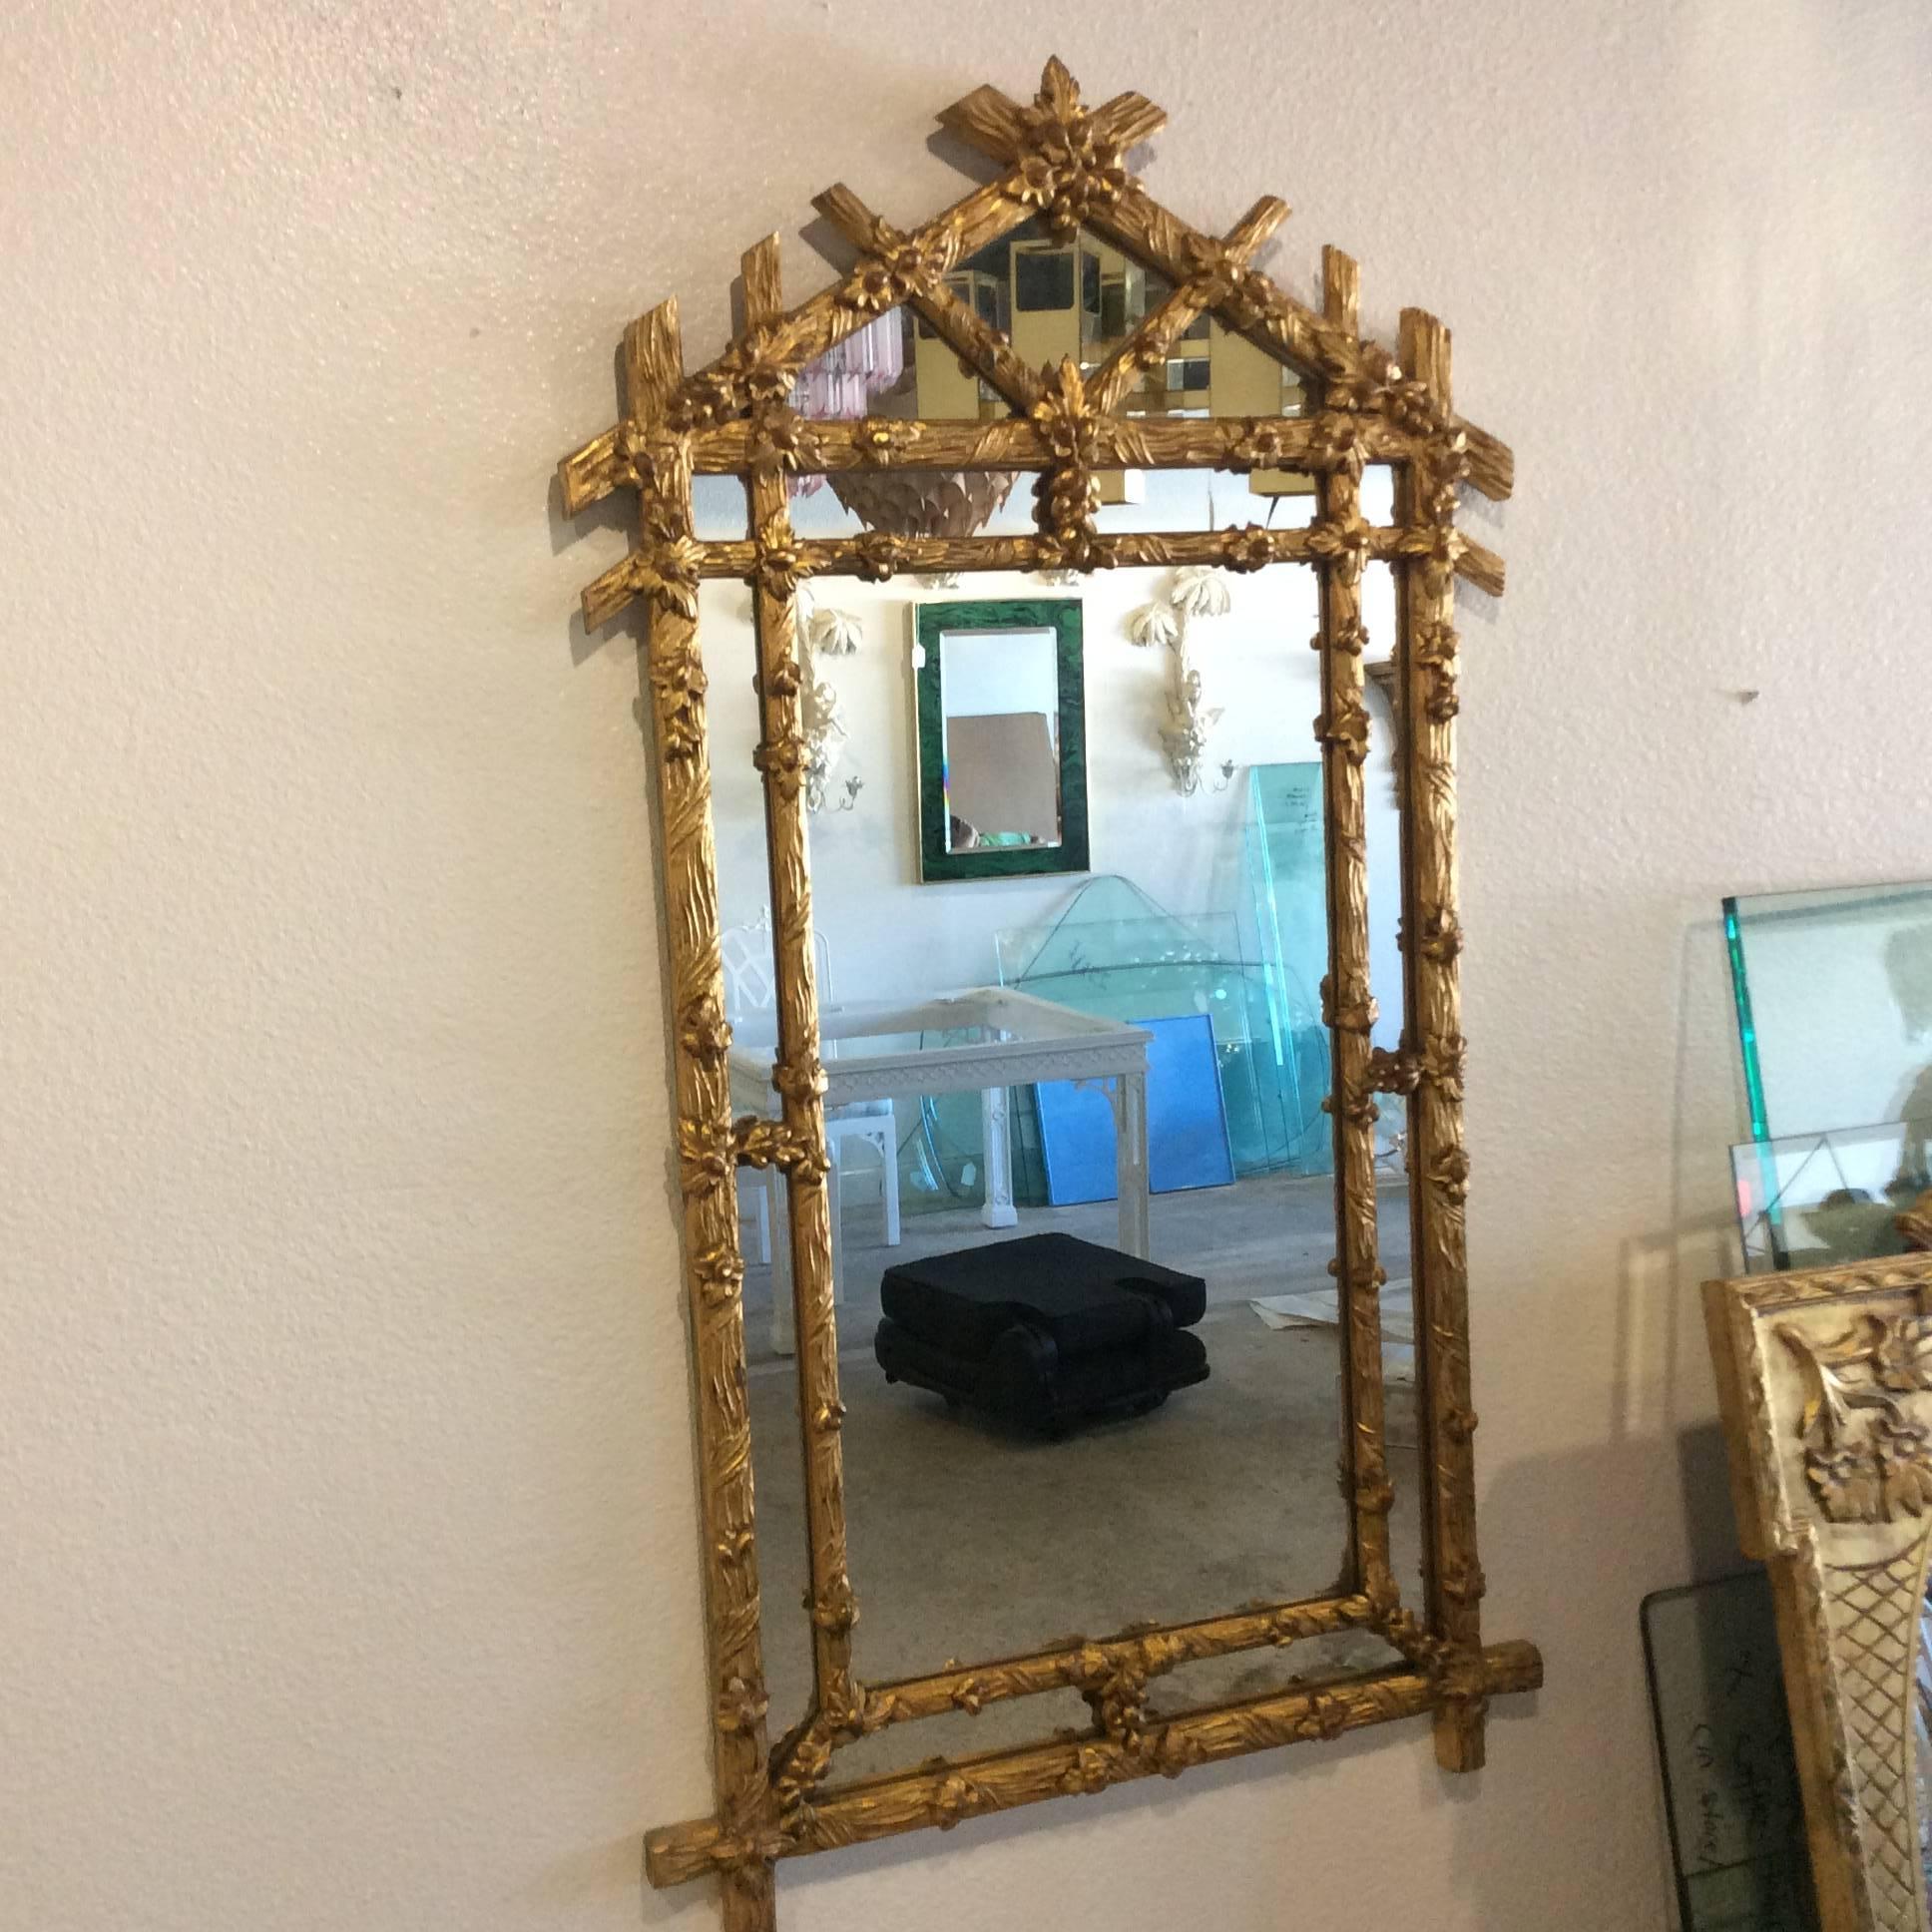 Beautiful vintage Hollywood Palm Beach Regency, faux bois wood wall mirror with floral motif accents. Perfect for that chinoiserie, Chinese Chippendale home decor feel!